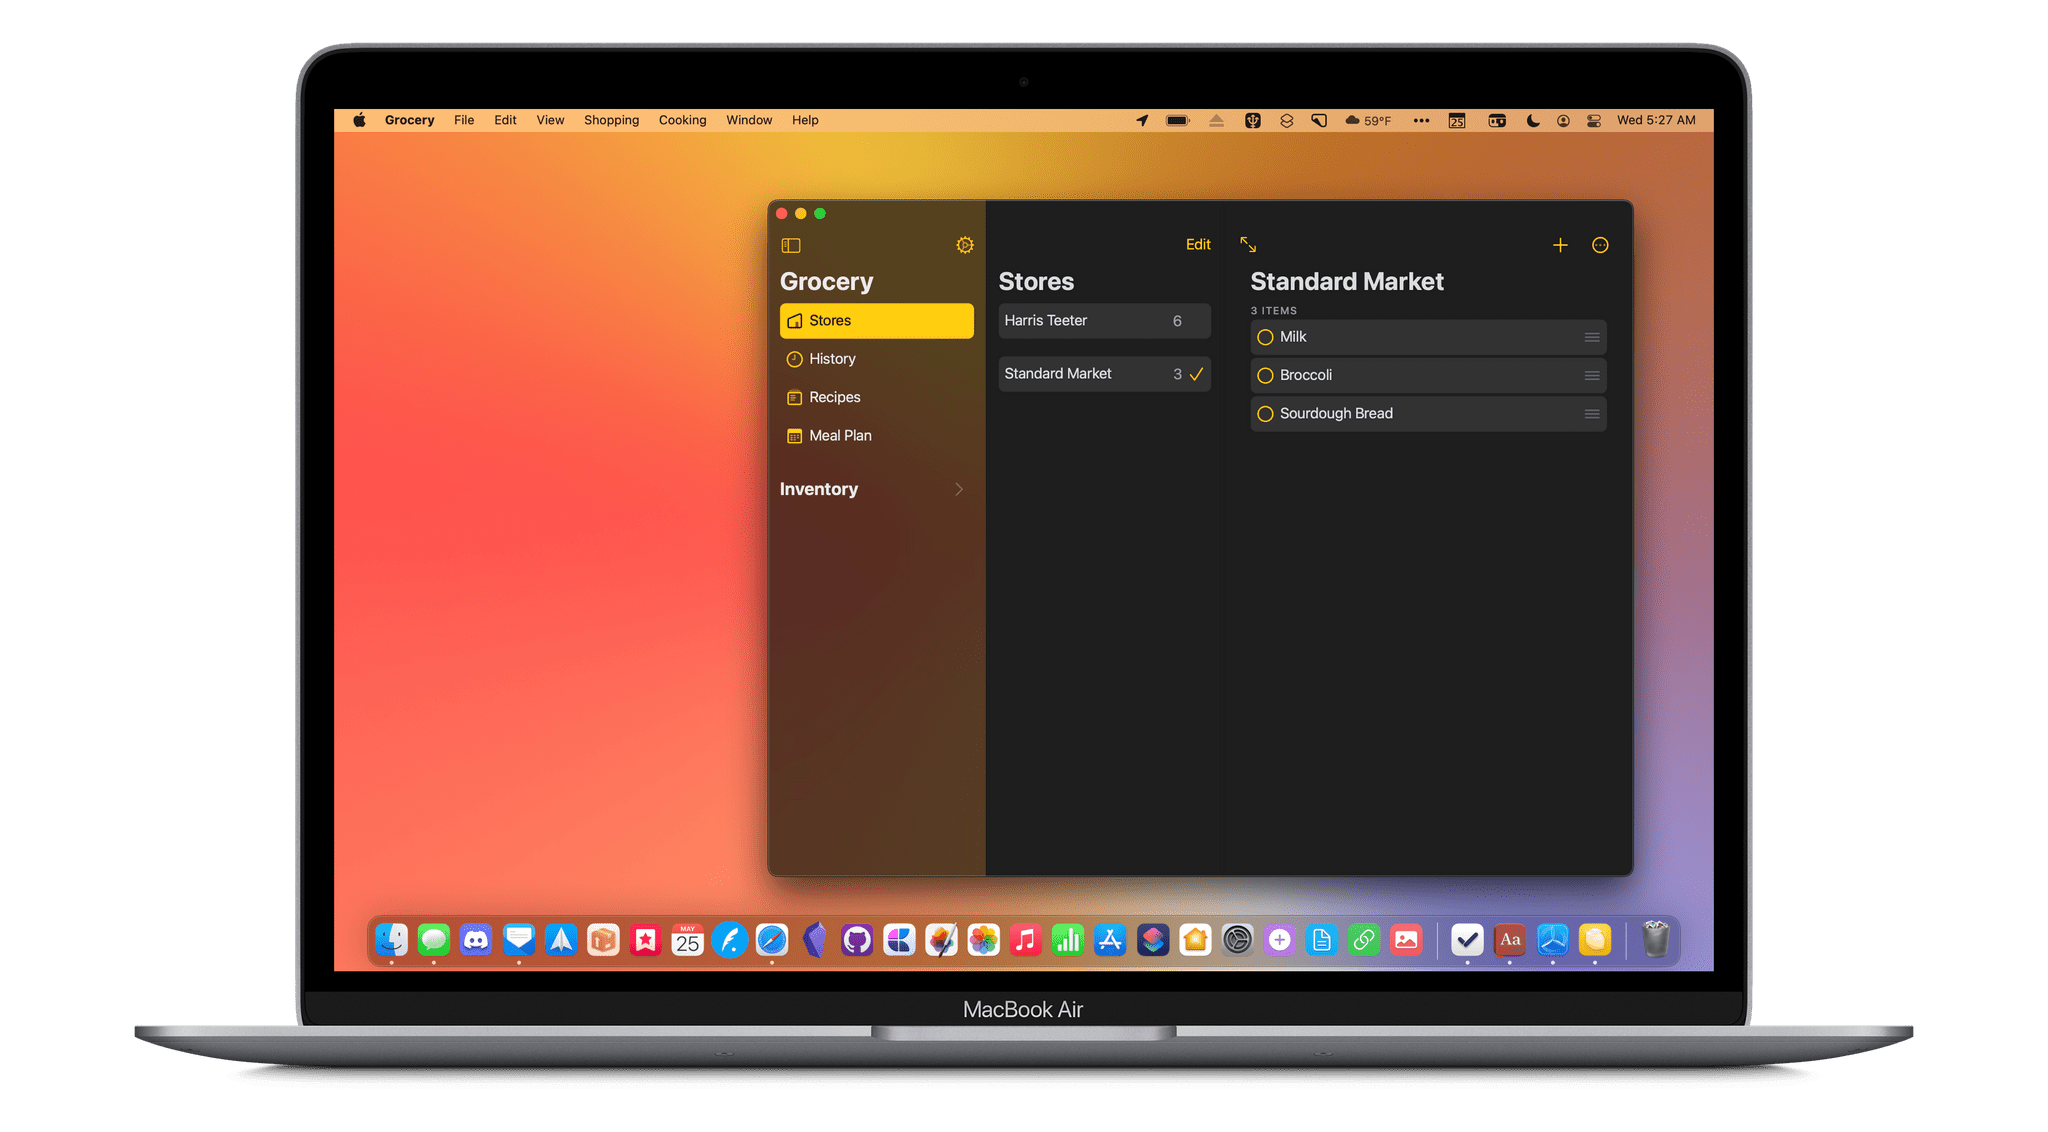 Grocery 3.0 on the Mac.